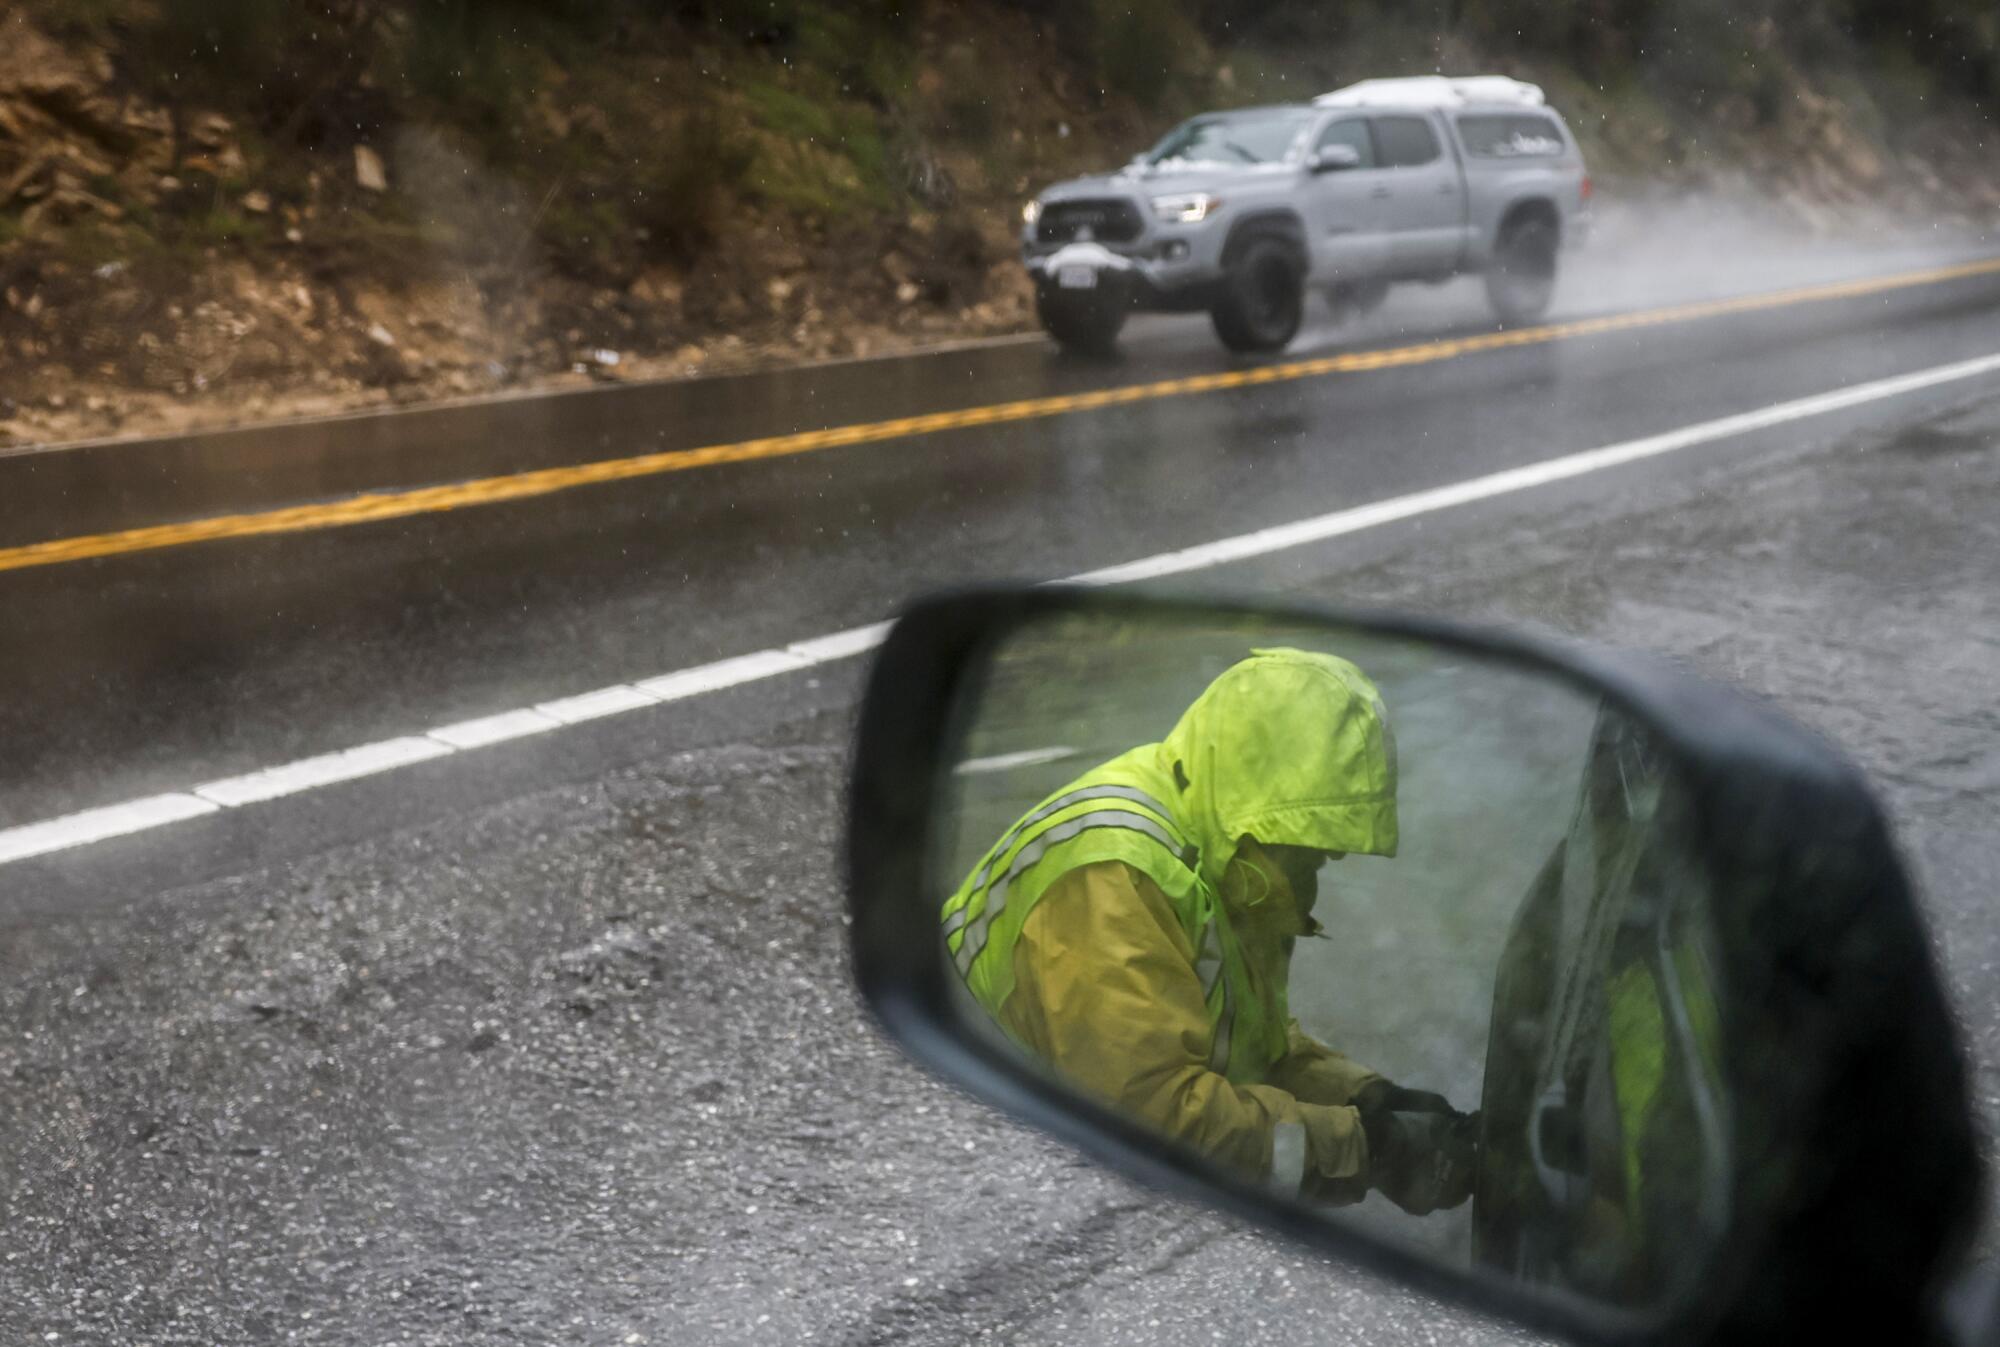 Chain installer Bill Siples at work along State Highway 330 en route to Big Bear